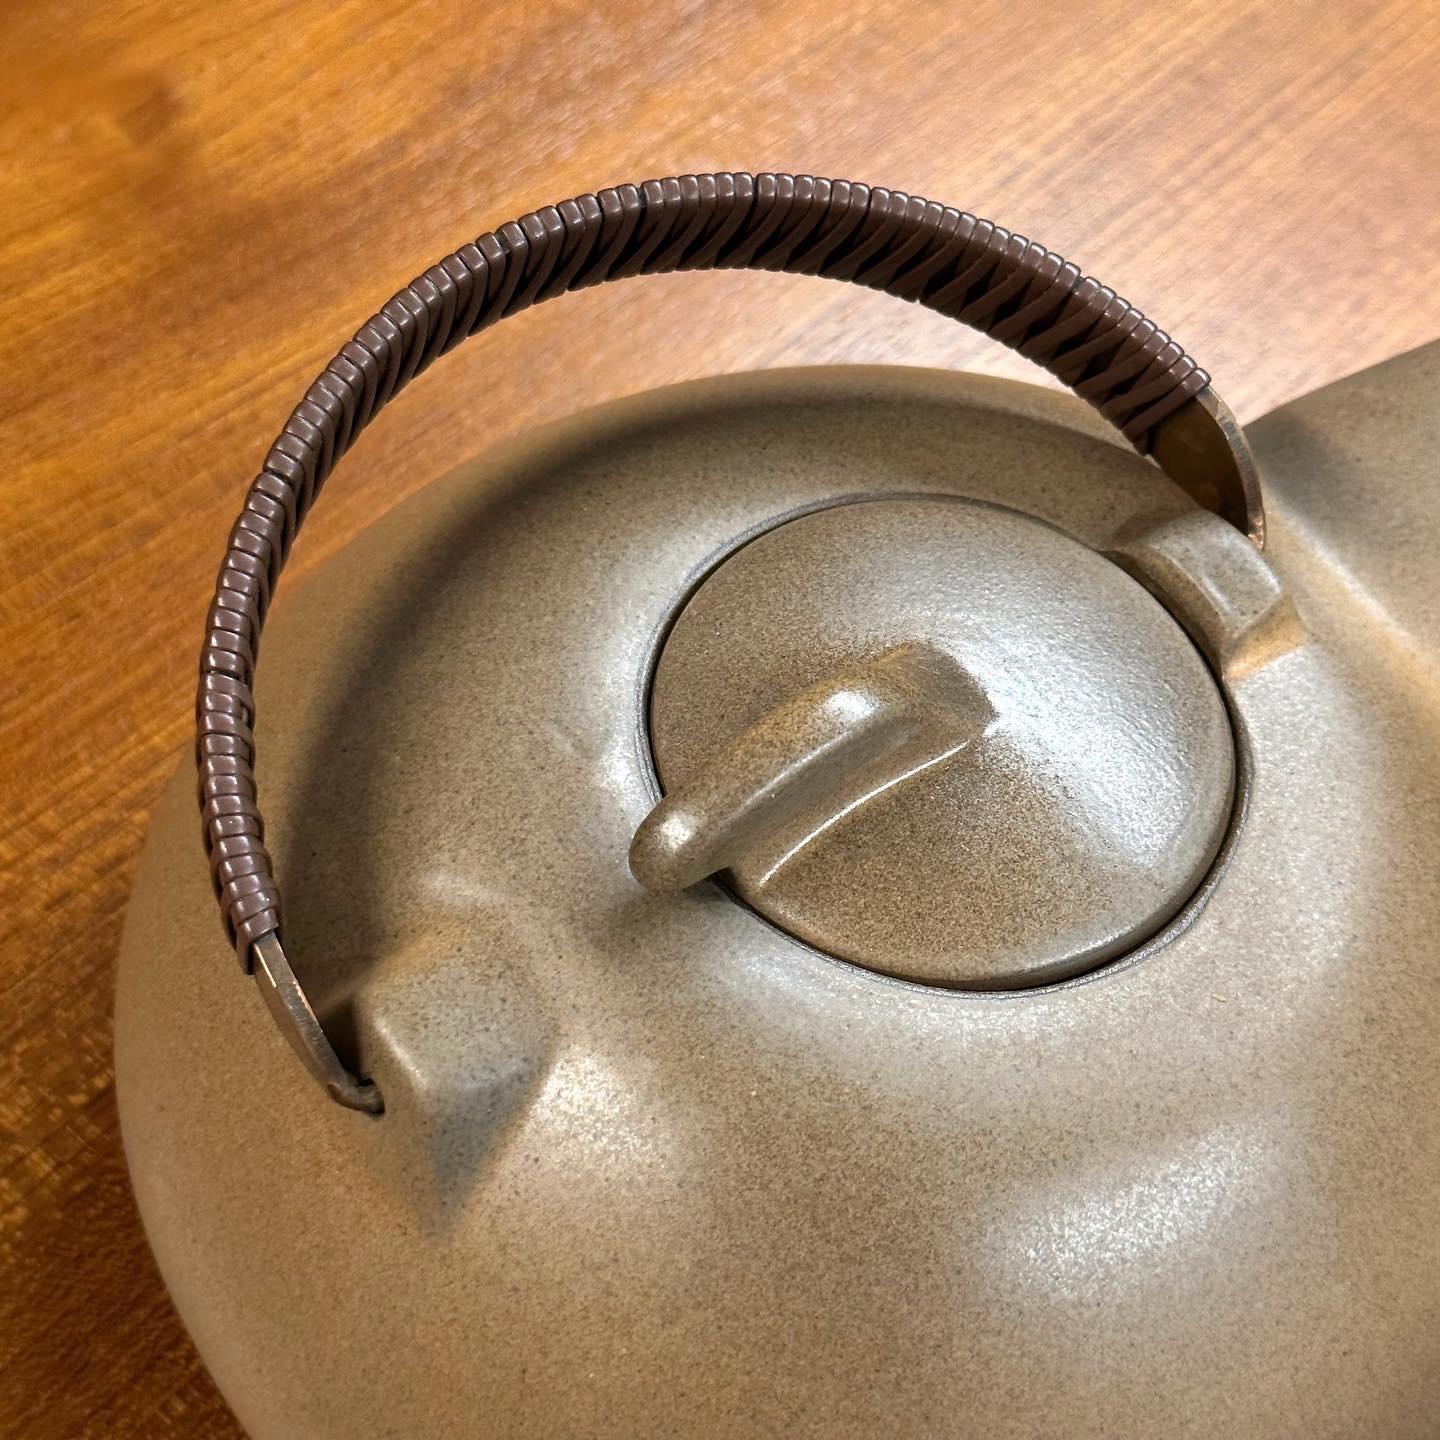 Seductive simplicity in a stoneware teapot. Bronze handle wrapped in plastic ‘rattan’. Edith Heath for Heath Ceramics, Sausalito, CA, 1949-1951. Excellent vintage condition.

In 1949, The New Yorker featured an article describing Heath Ceramic's